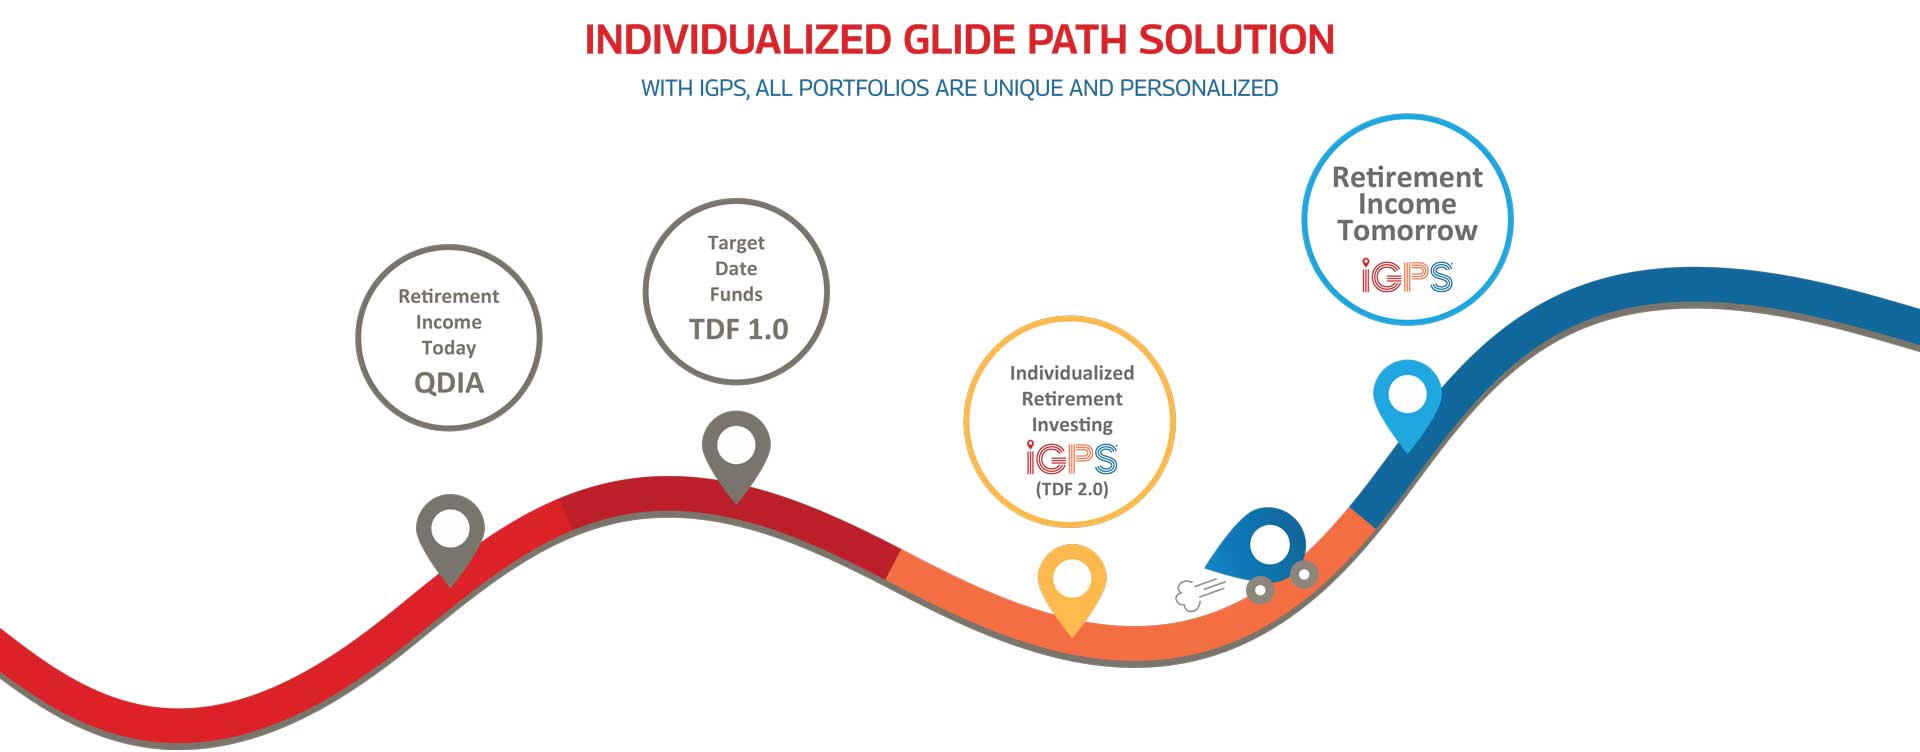 INDIVIDUALIZED GLIDE PATH SOLUTION